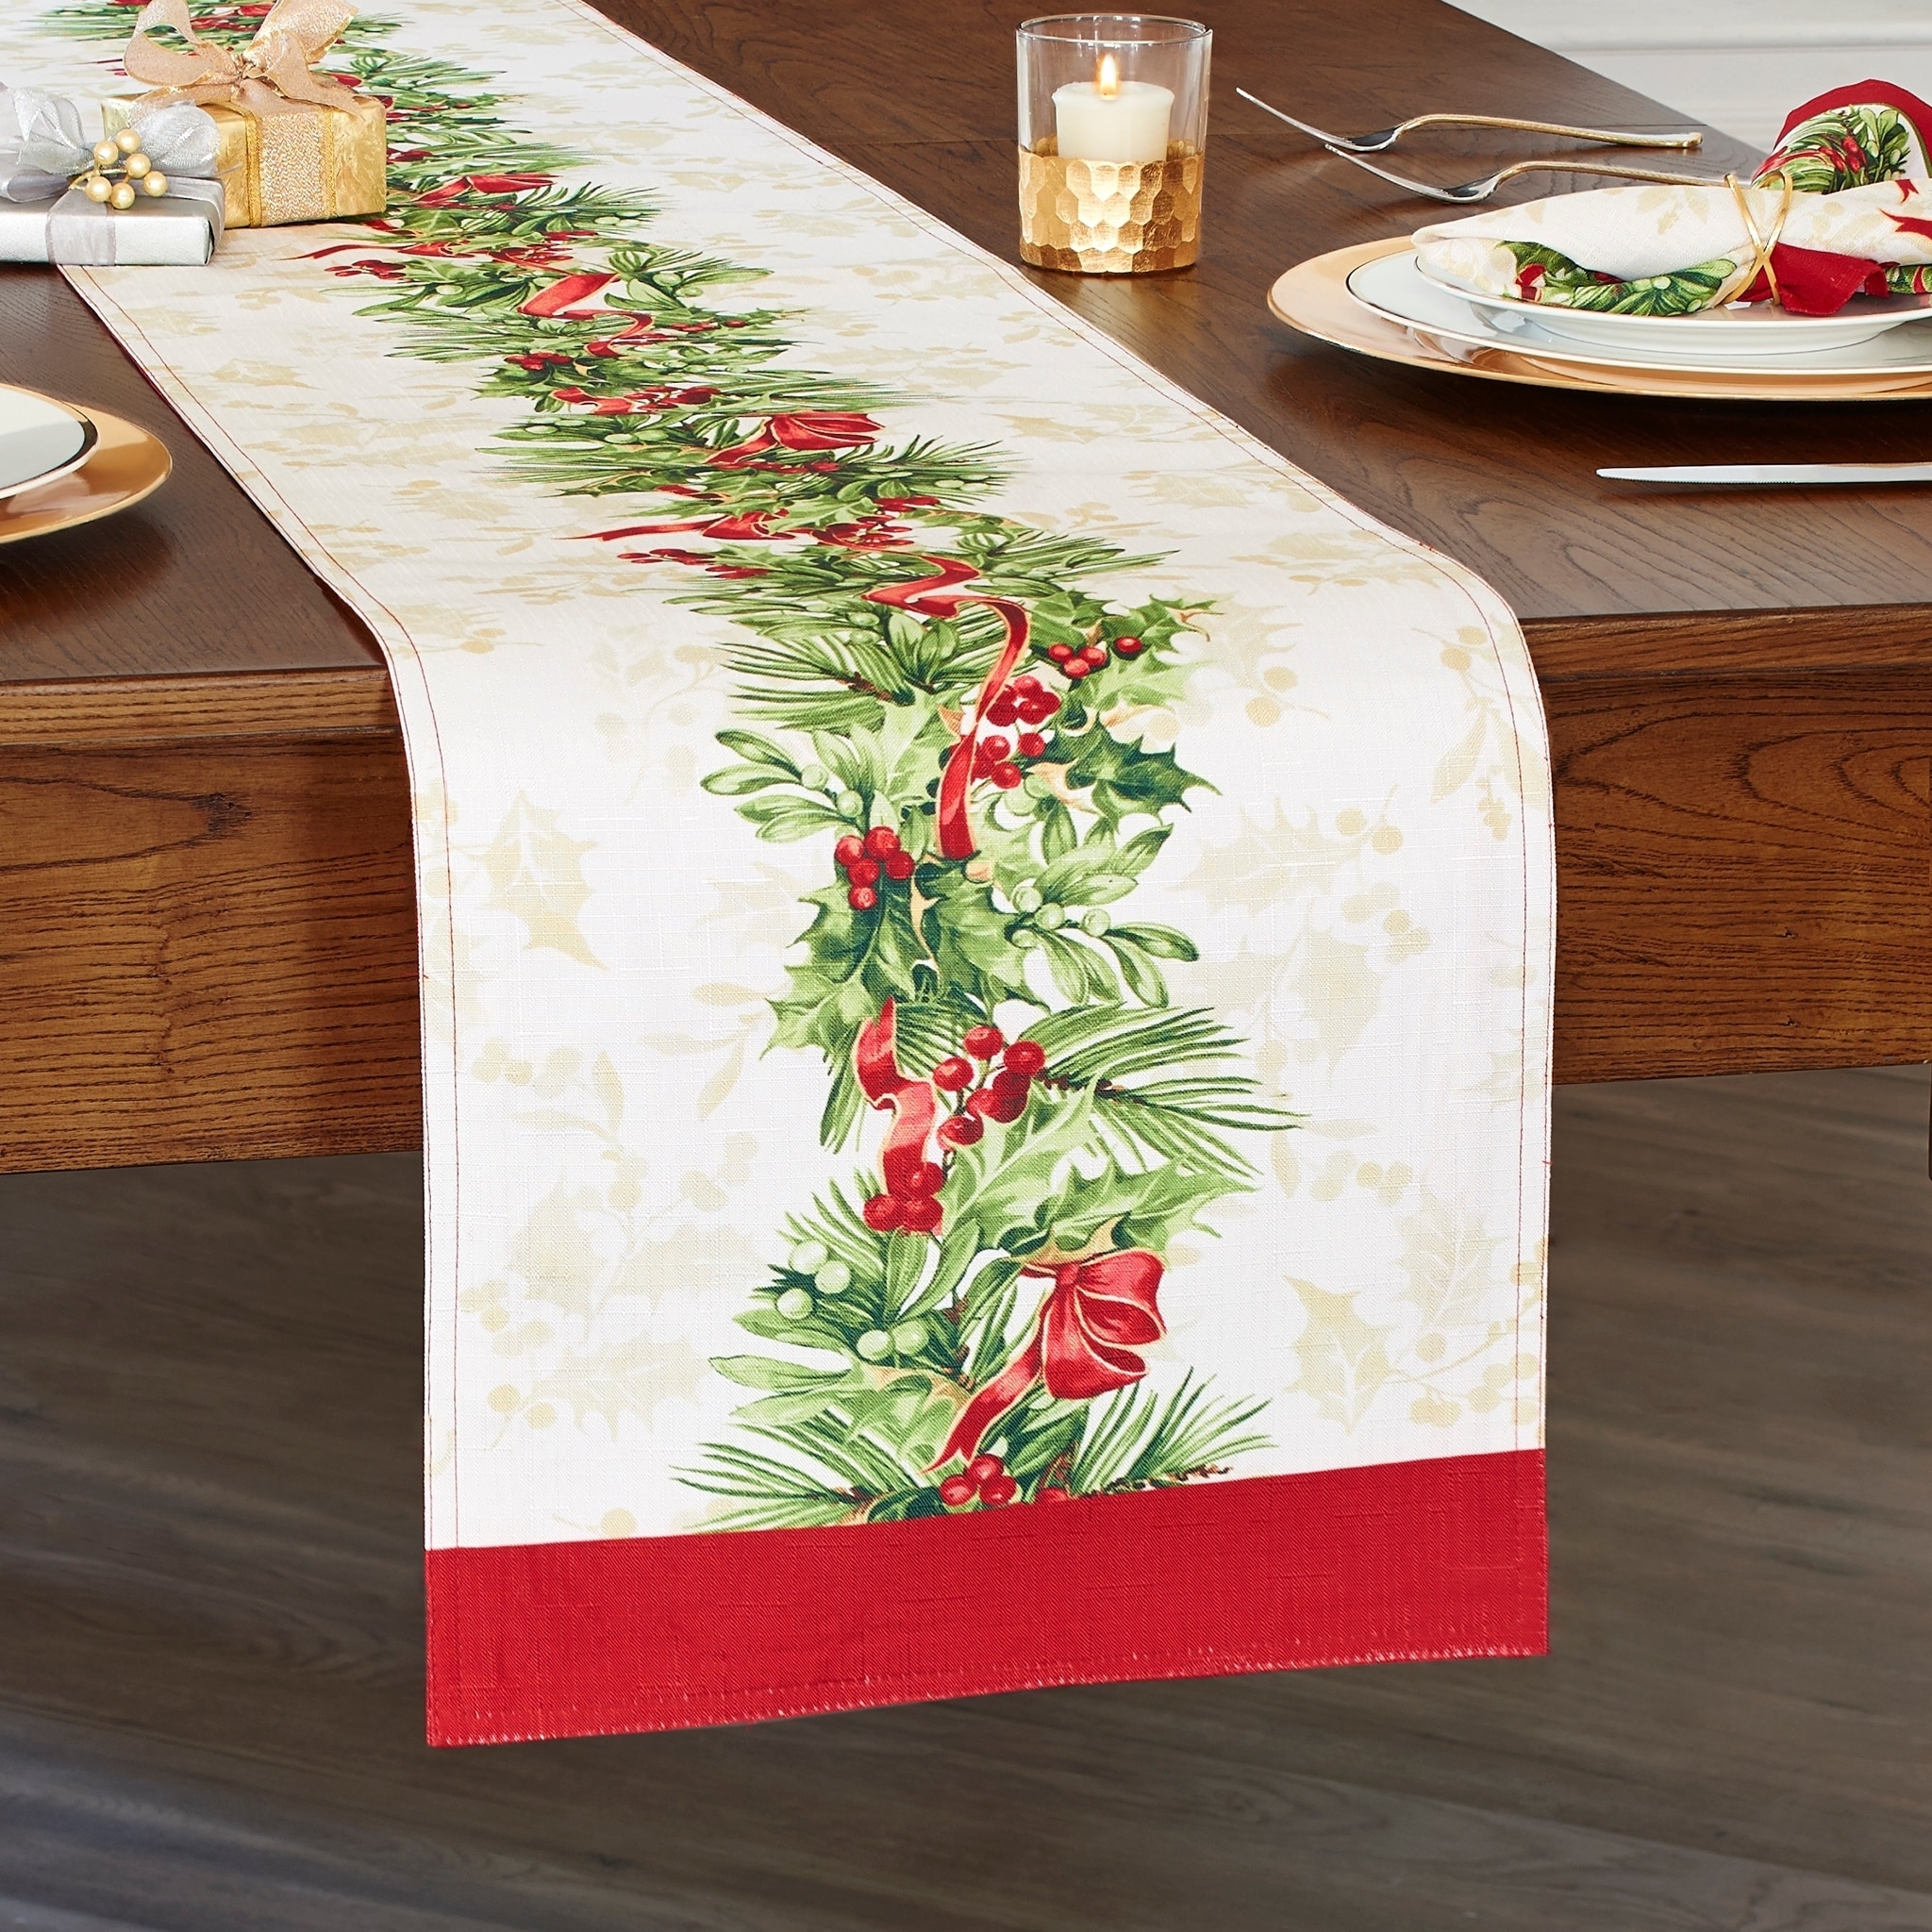 Holly Traditions Holiday Table Runner 